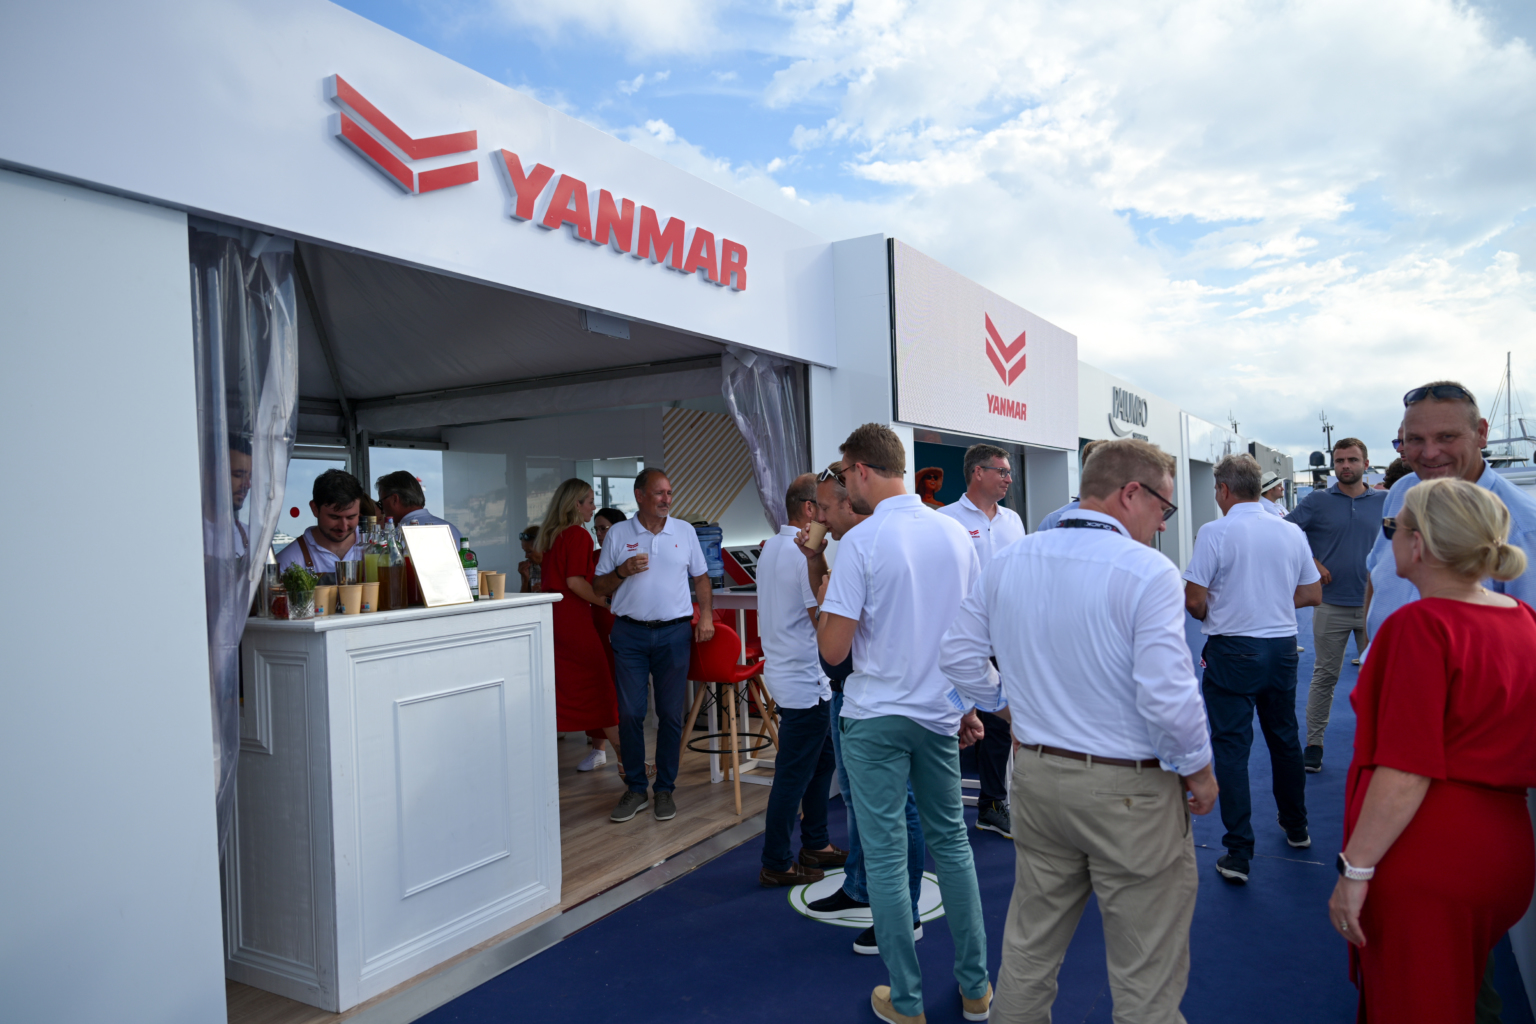 Join us in Cannes to meet the YANMAR Marine International team and learn all about the newest technology!